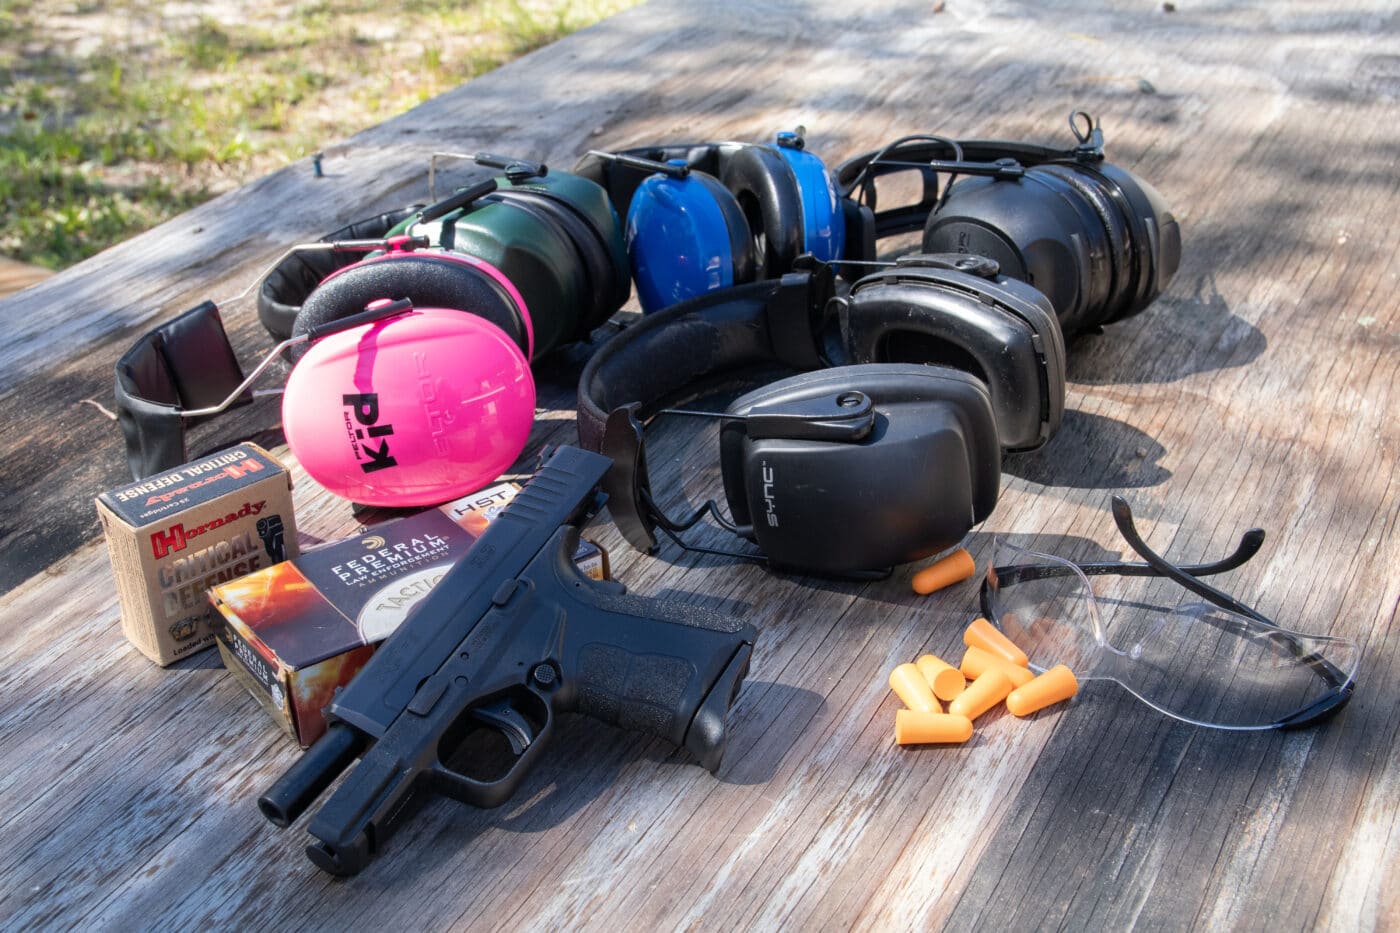 Variety of different types of ear protection on table next to pistol and ammo